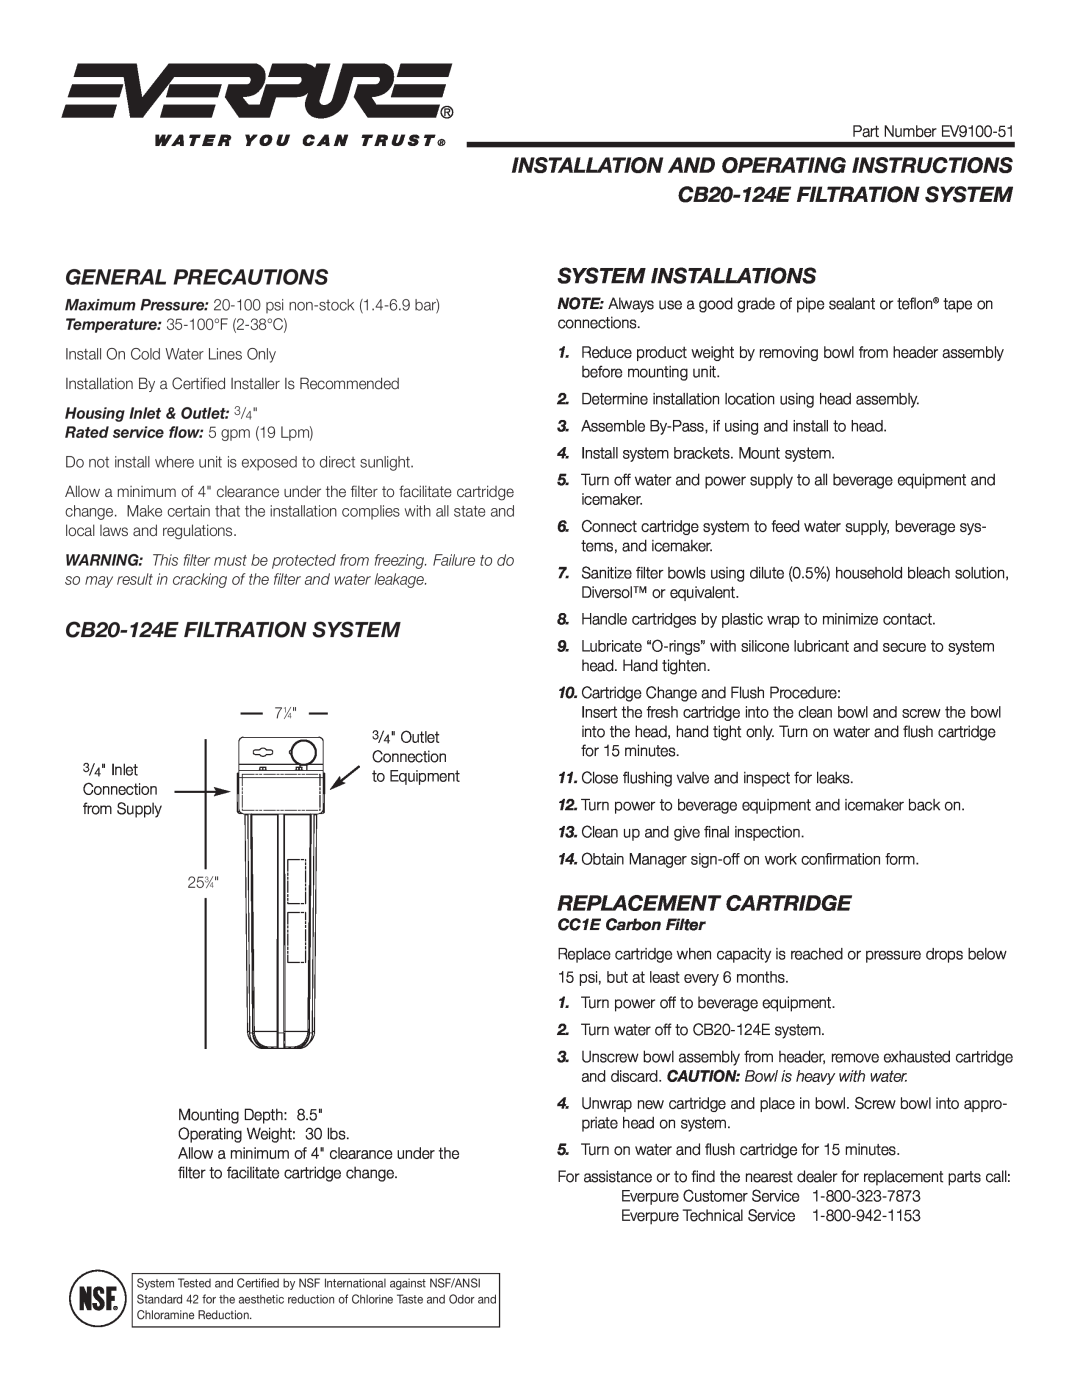 Everpure manual INSTALLATION AND OPERATING INSTRUCTIONS CB20-124E FILTRATION SYSTEM, General Precautions 